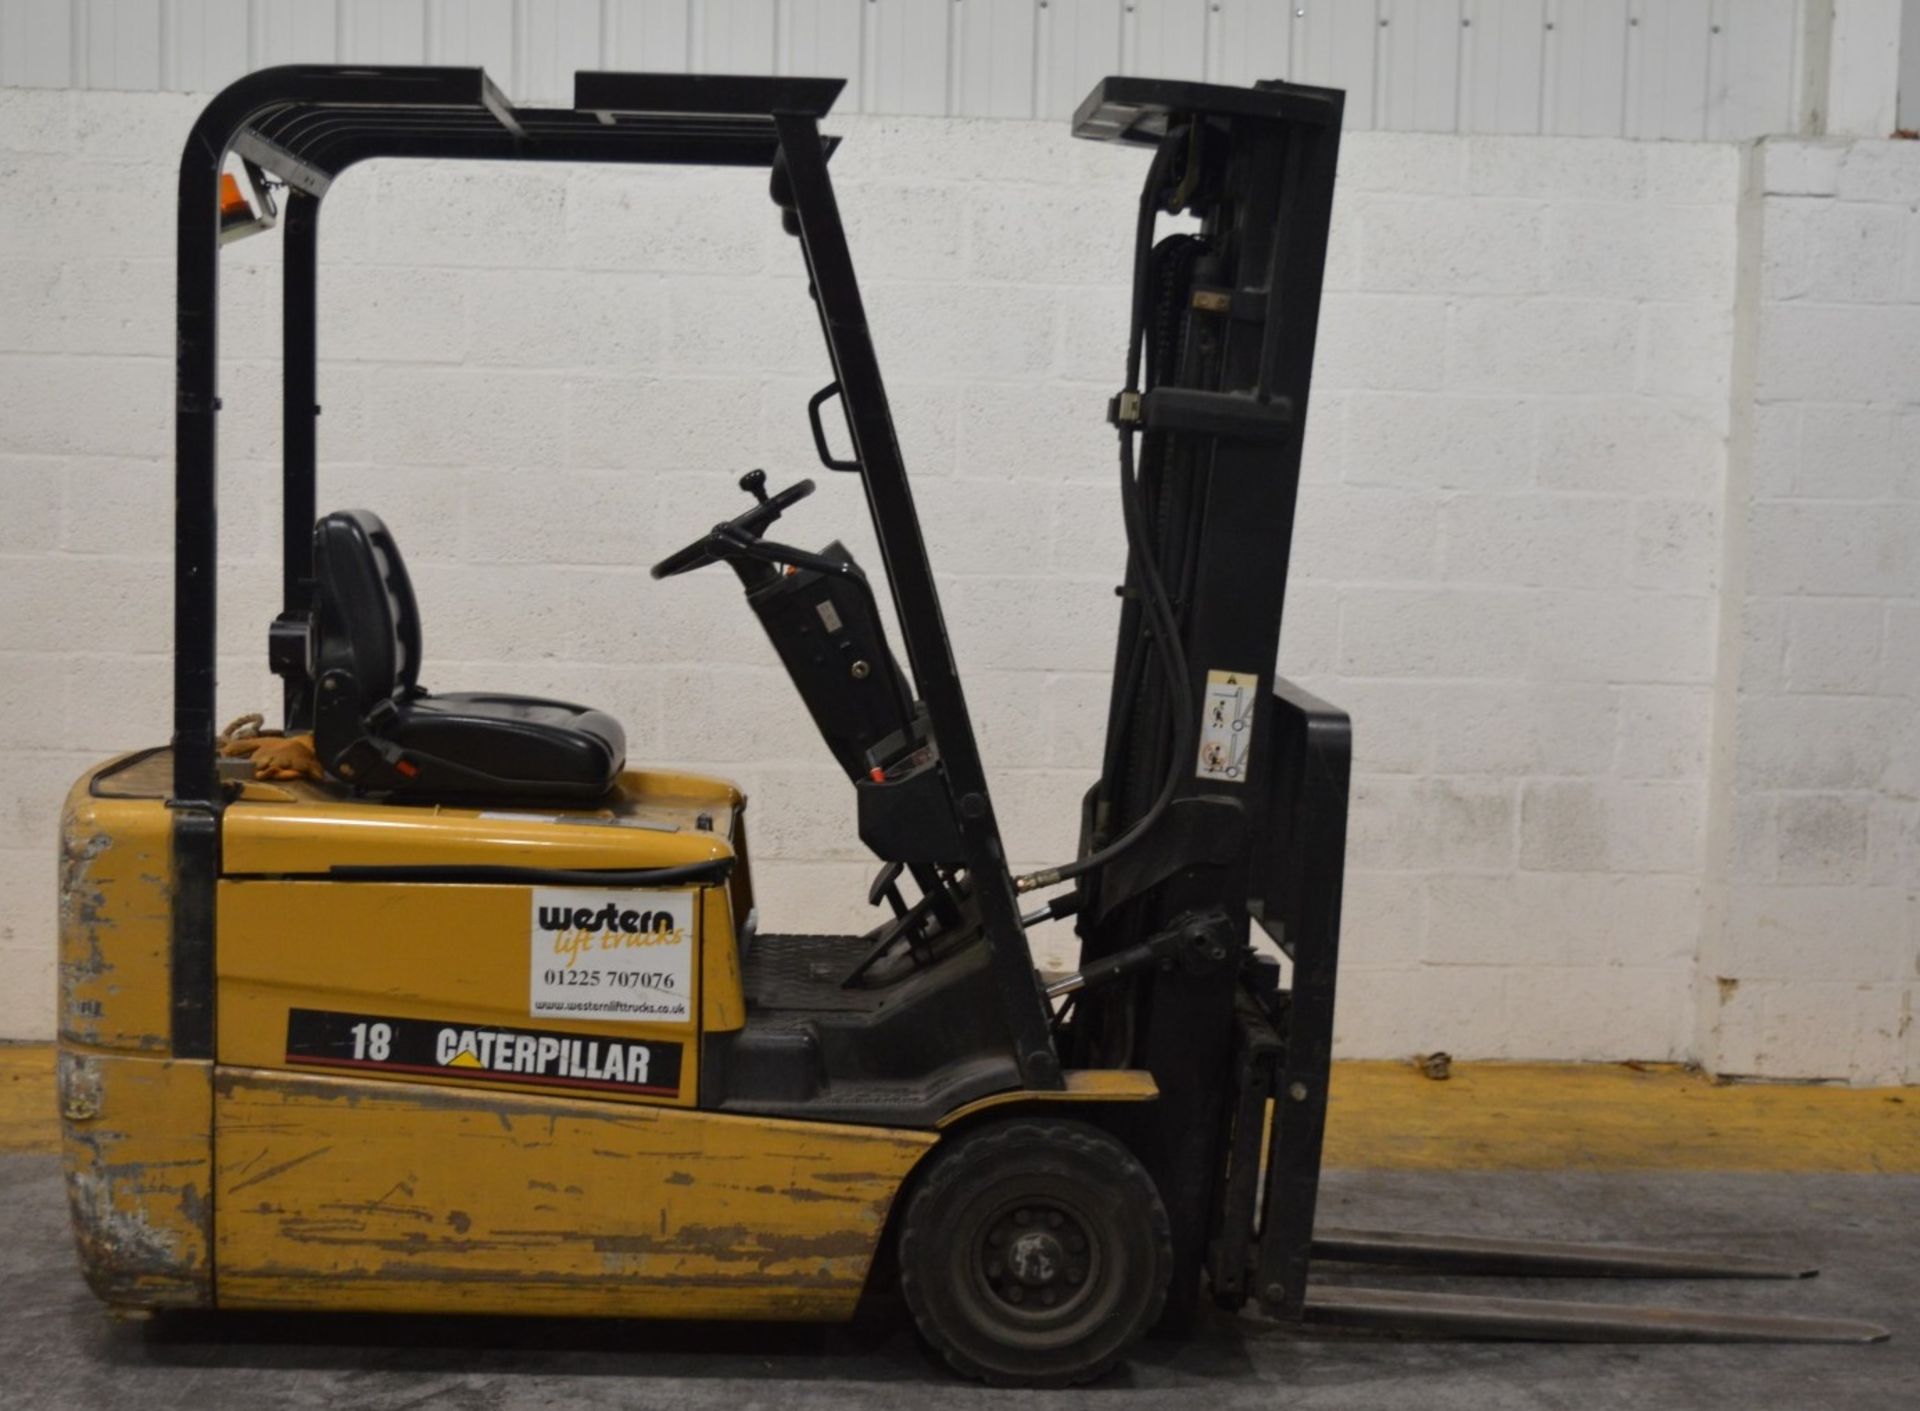 1 x Caterpillar Electric Counter Balance Forklift Truck - Model EP18KT - 1800kg Basic Capacity - - Image 2 of 14